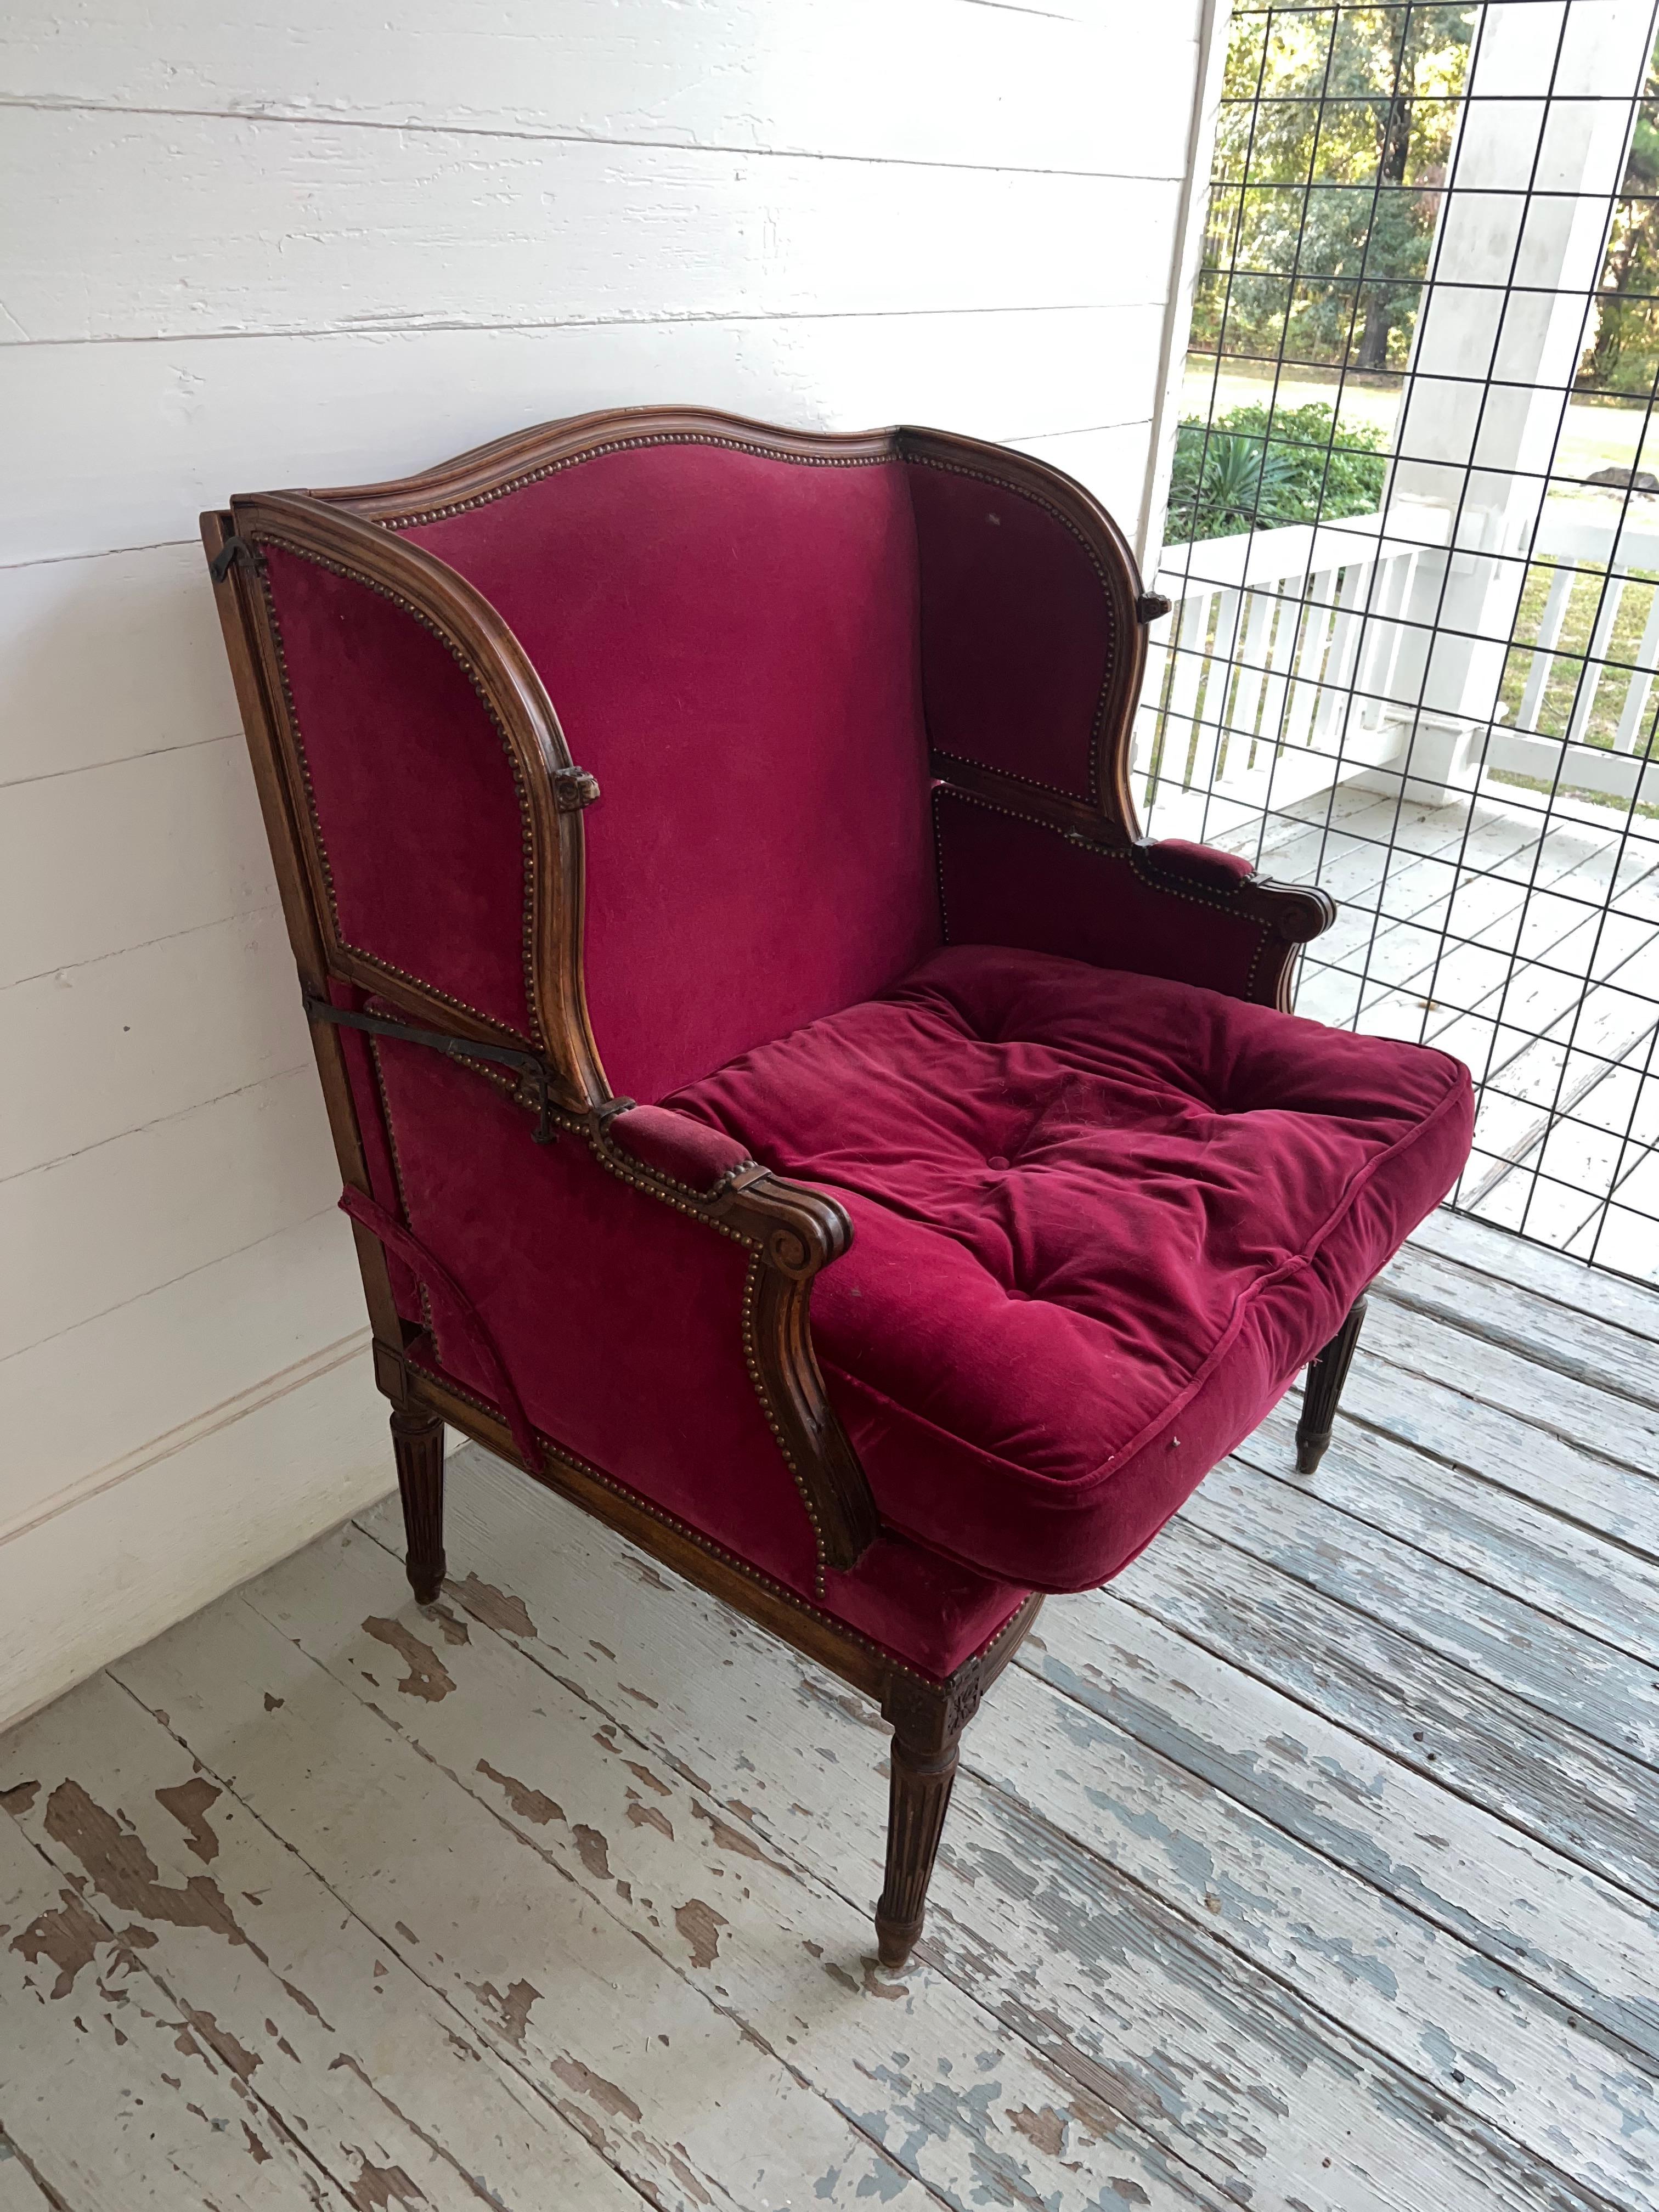 A french 19th century carved walnut metamorphic bergere, armchair that easily folds out to a bed. This highly decorative chair is wonderful to look at, large enough for a tall person to use comfortably and is very pratical for extra sleeping on a